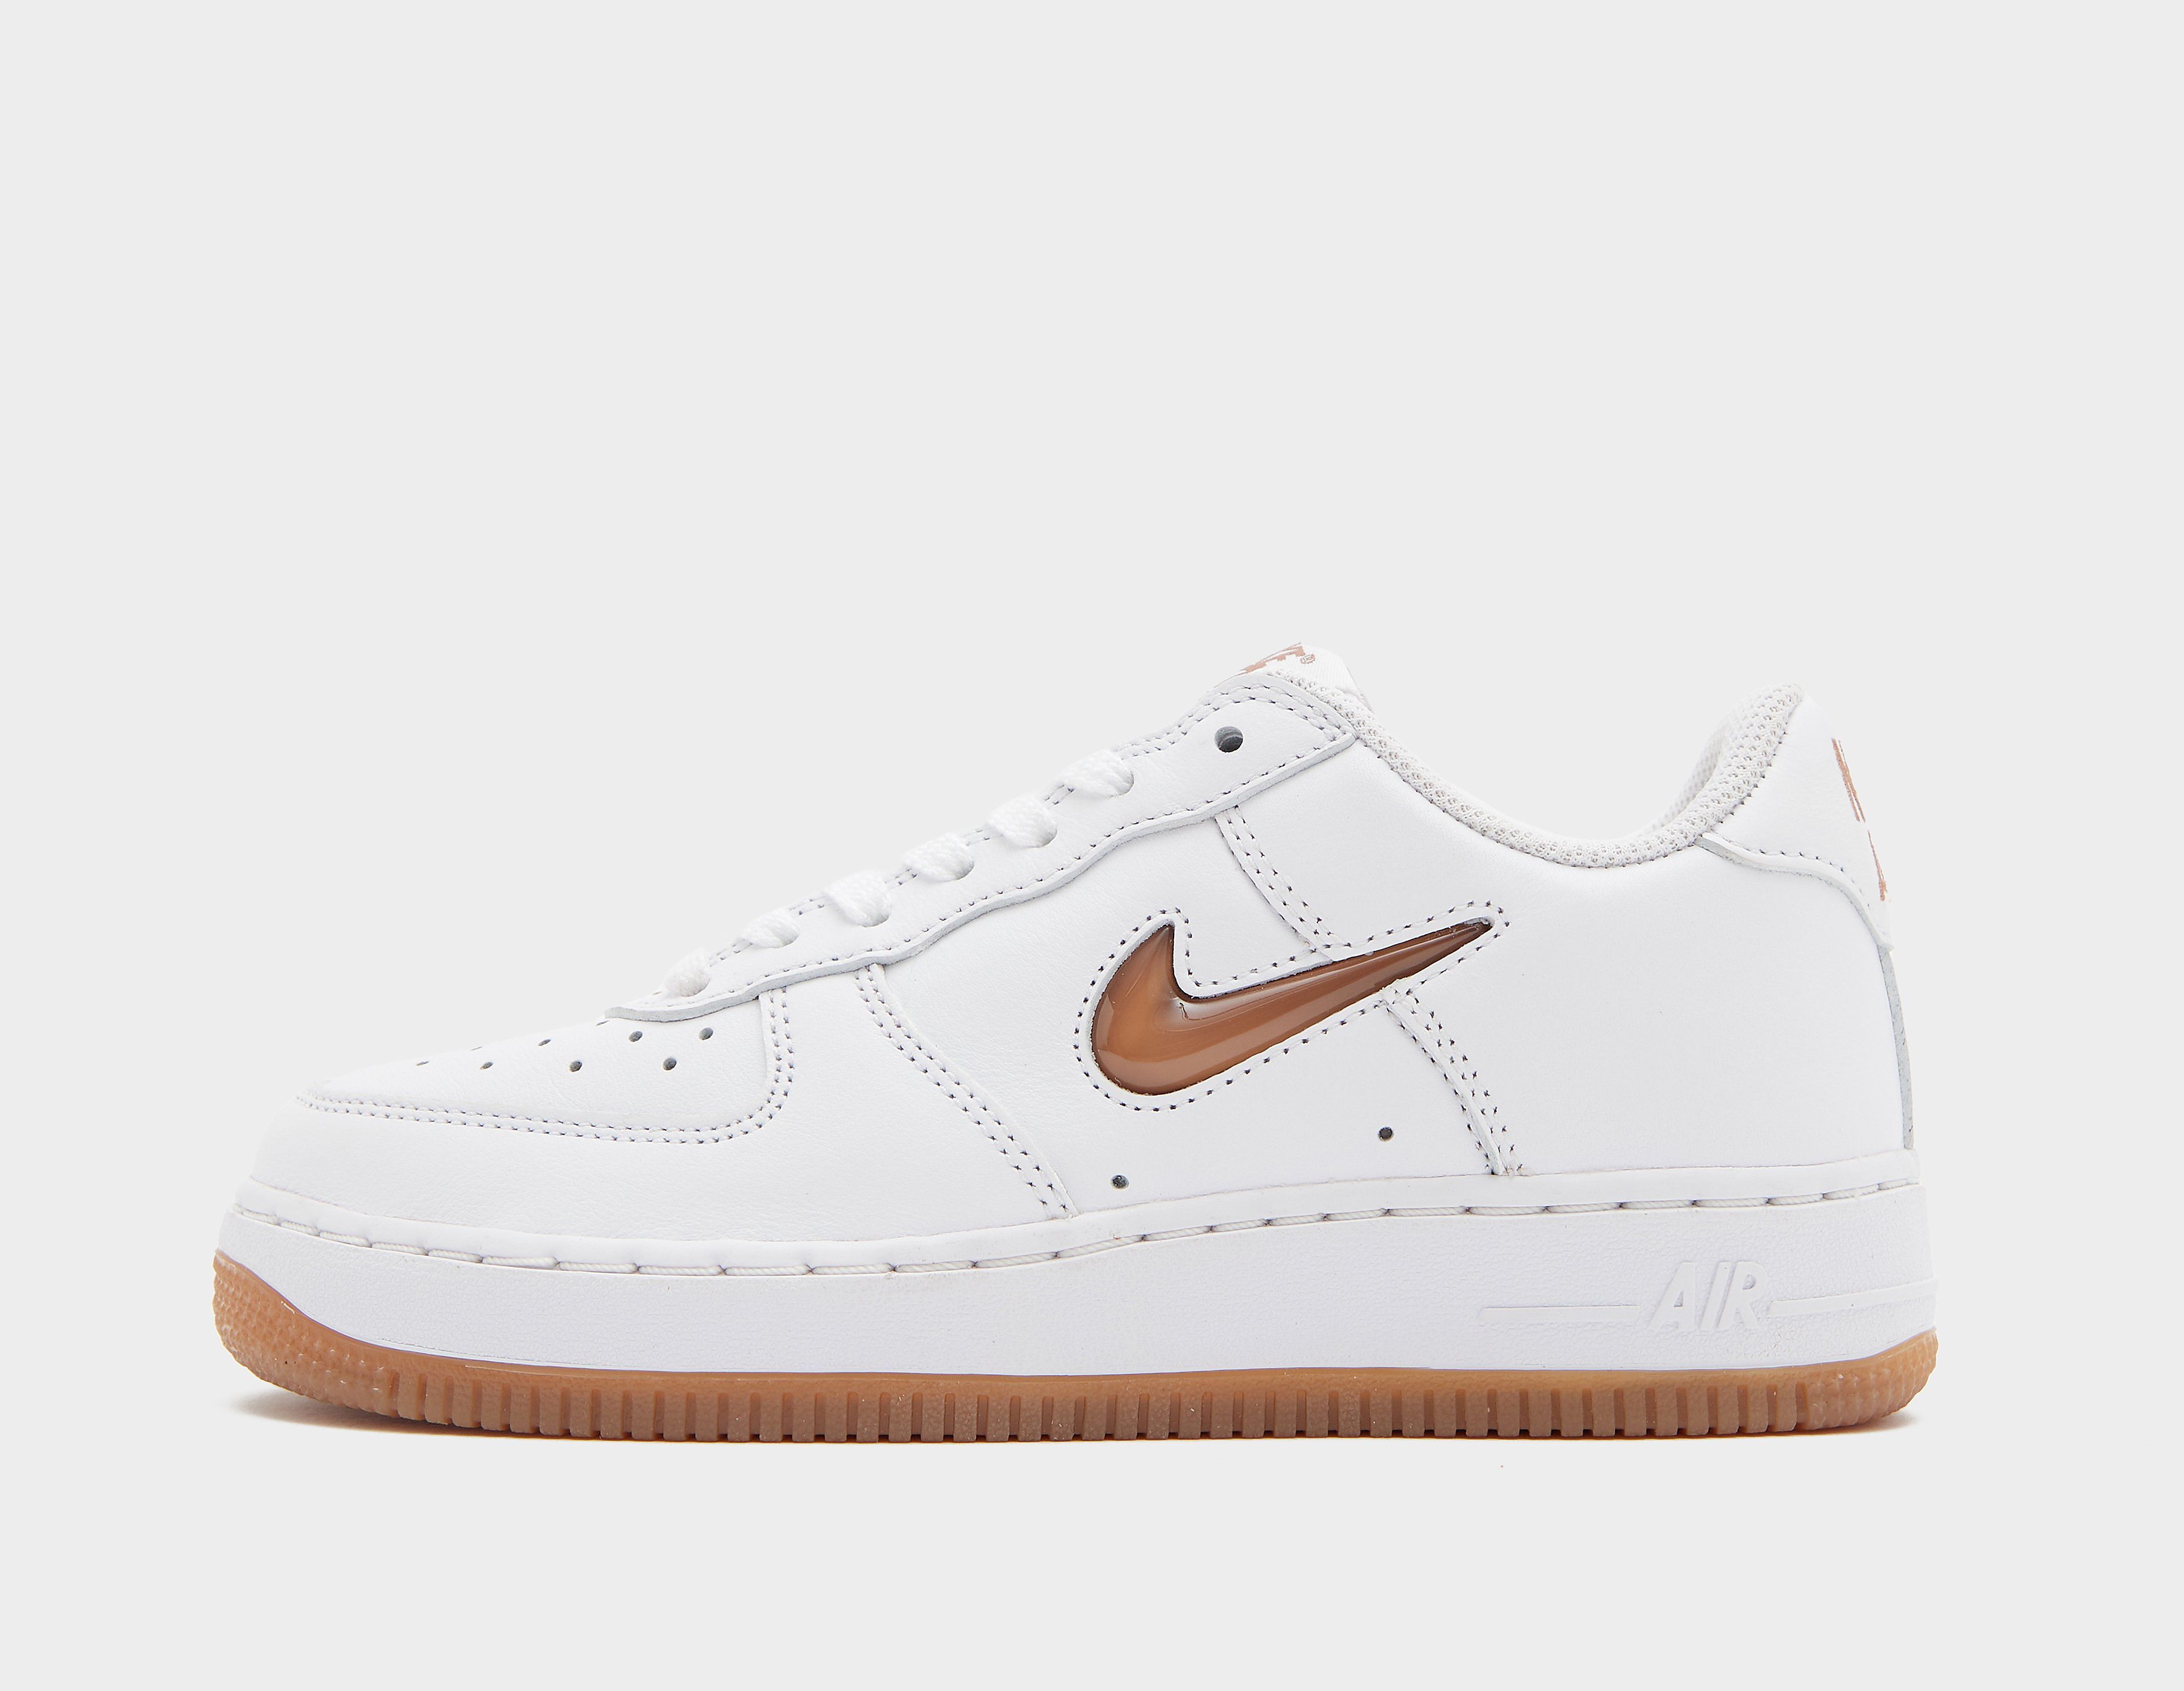 Nike Air Force 1 'Colour of the Month' Jewel Femme, White